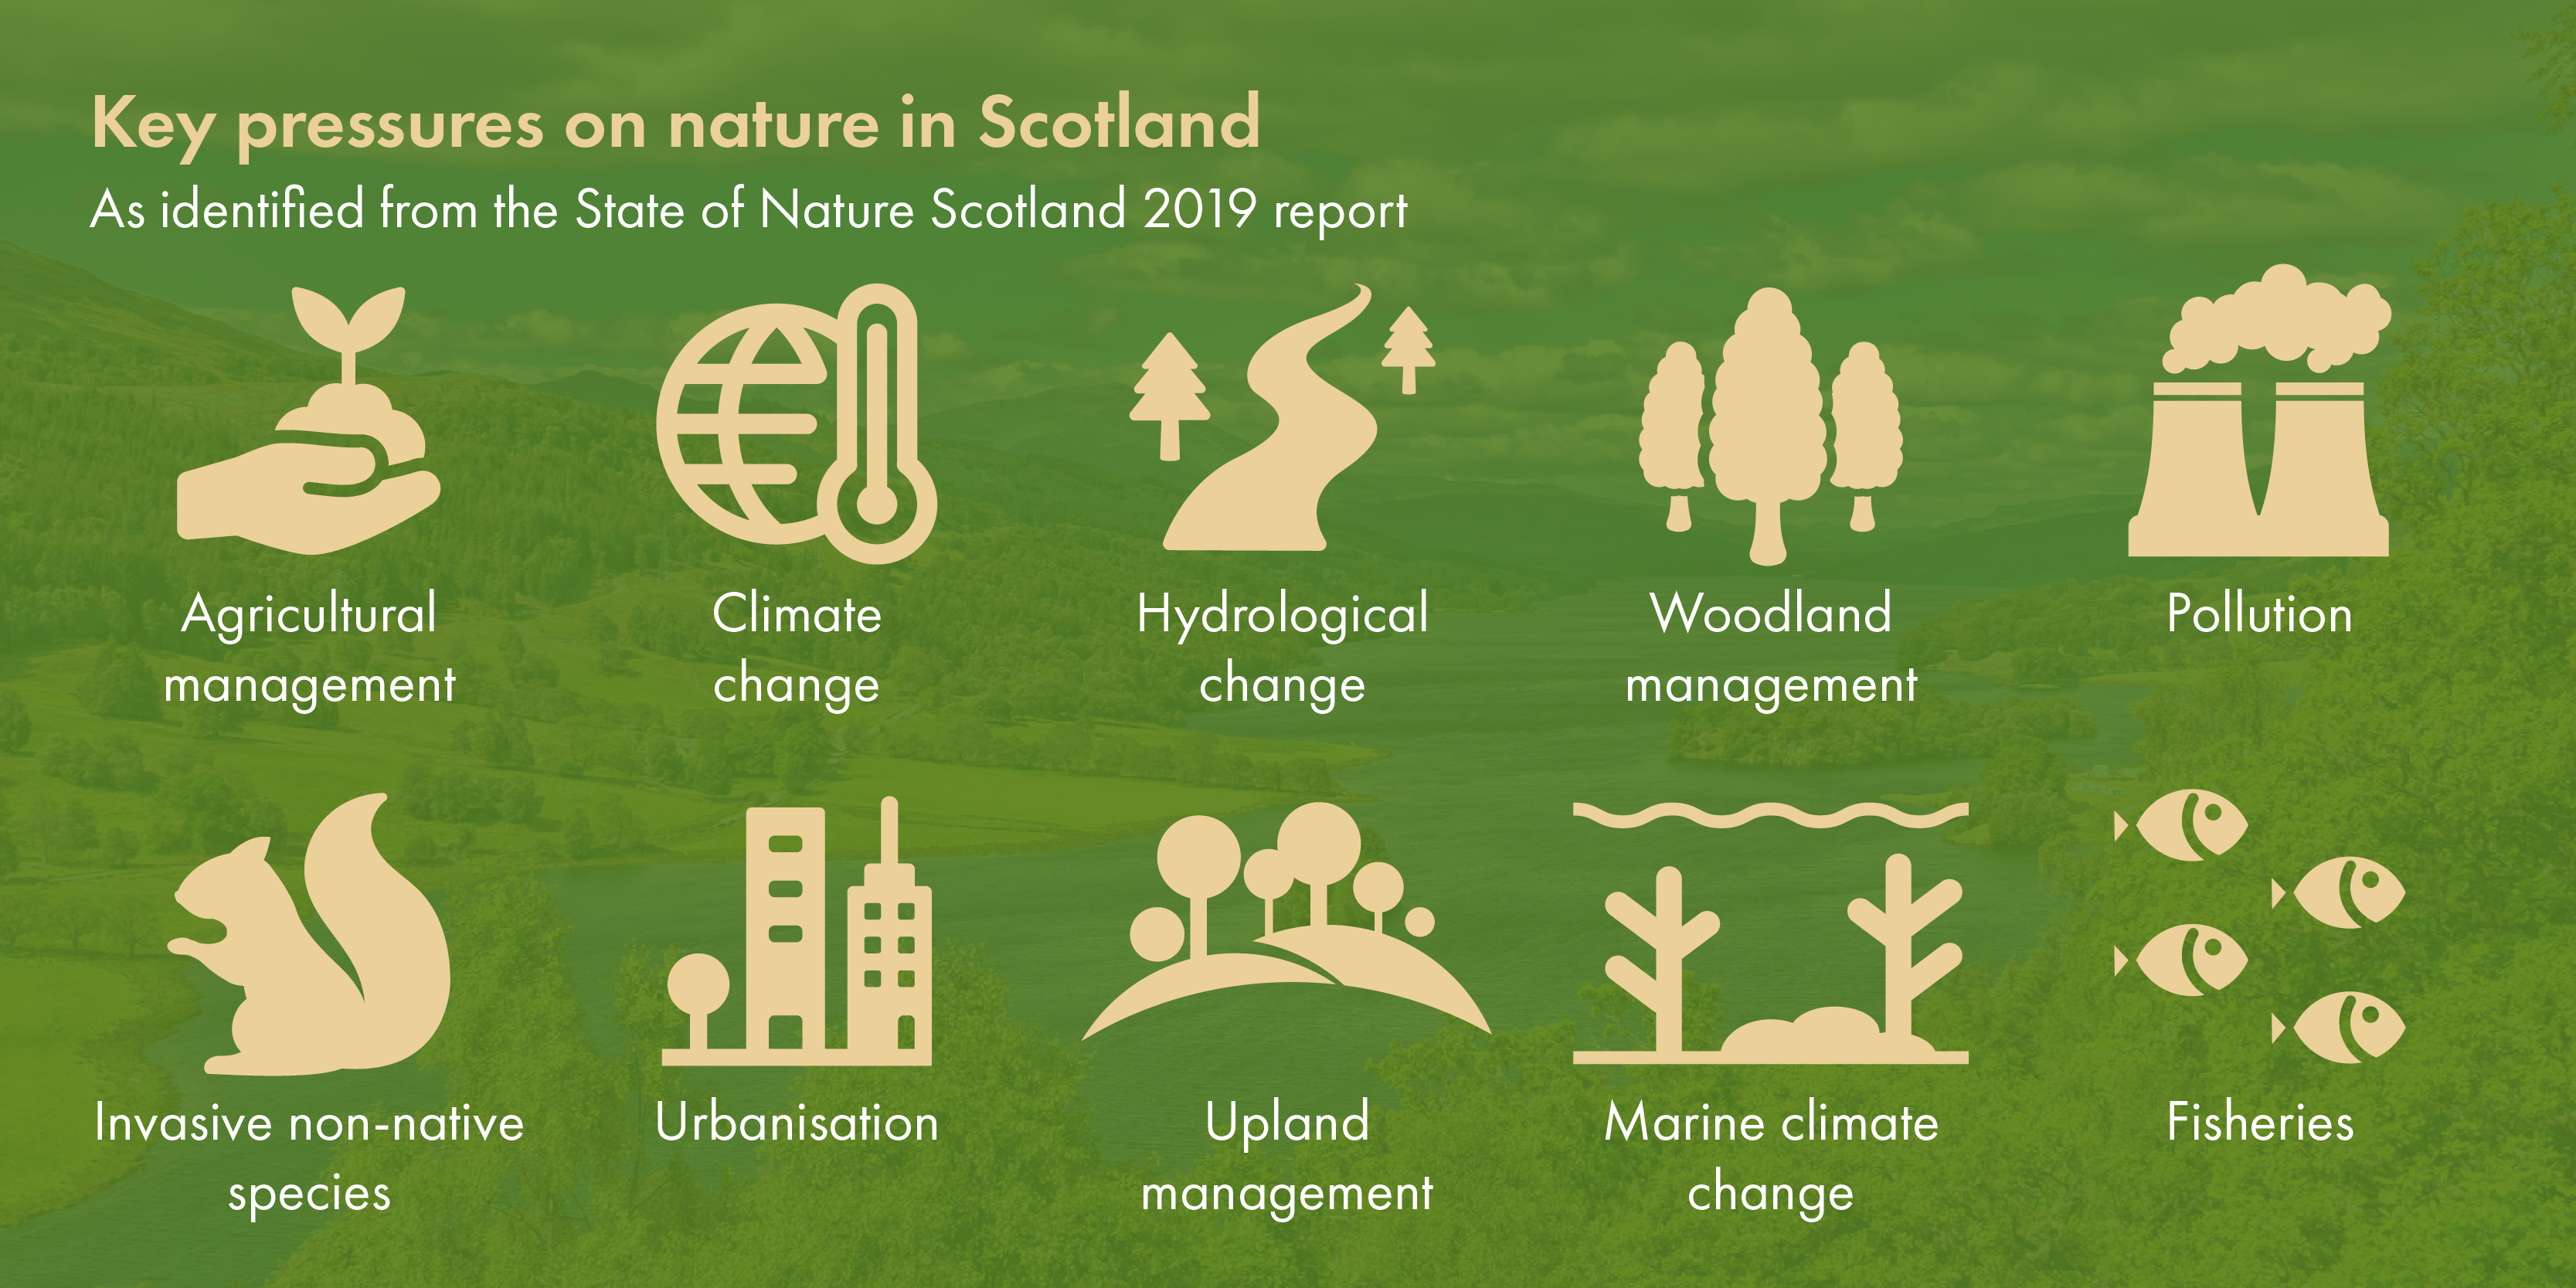 Infographic showing key pressures on nature in Scotland from the State of Nature Scotland 2019 report: agricultural management, climate change, hydrological change, woodland management, pollution, invasive non-native species, urbanisation, upland management, marine climate change, fisheries.